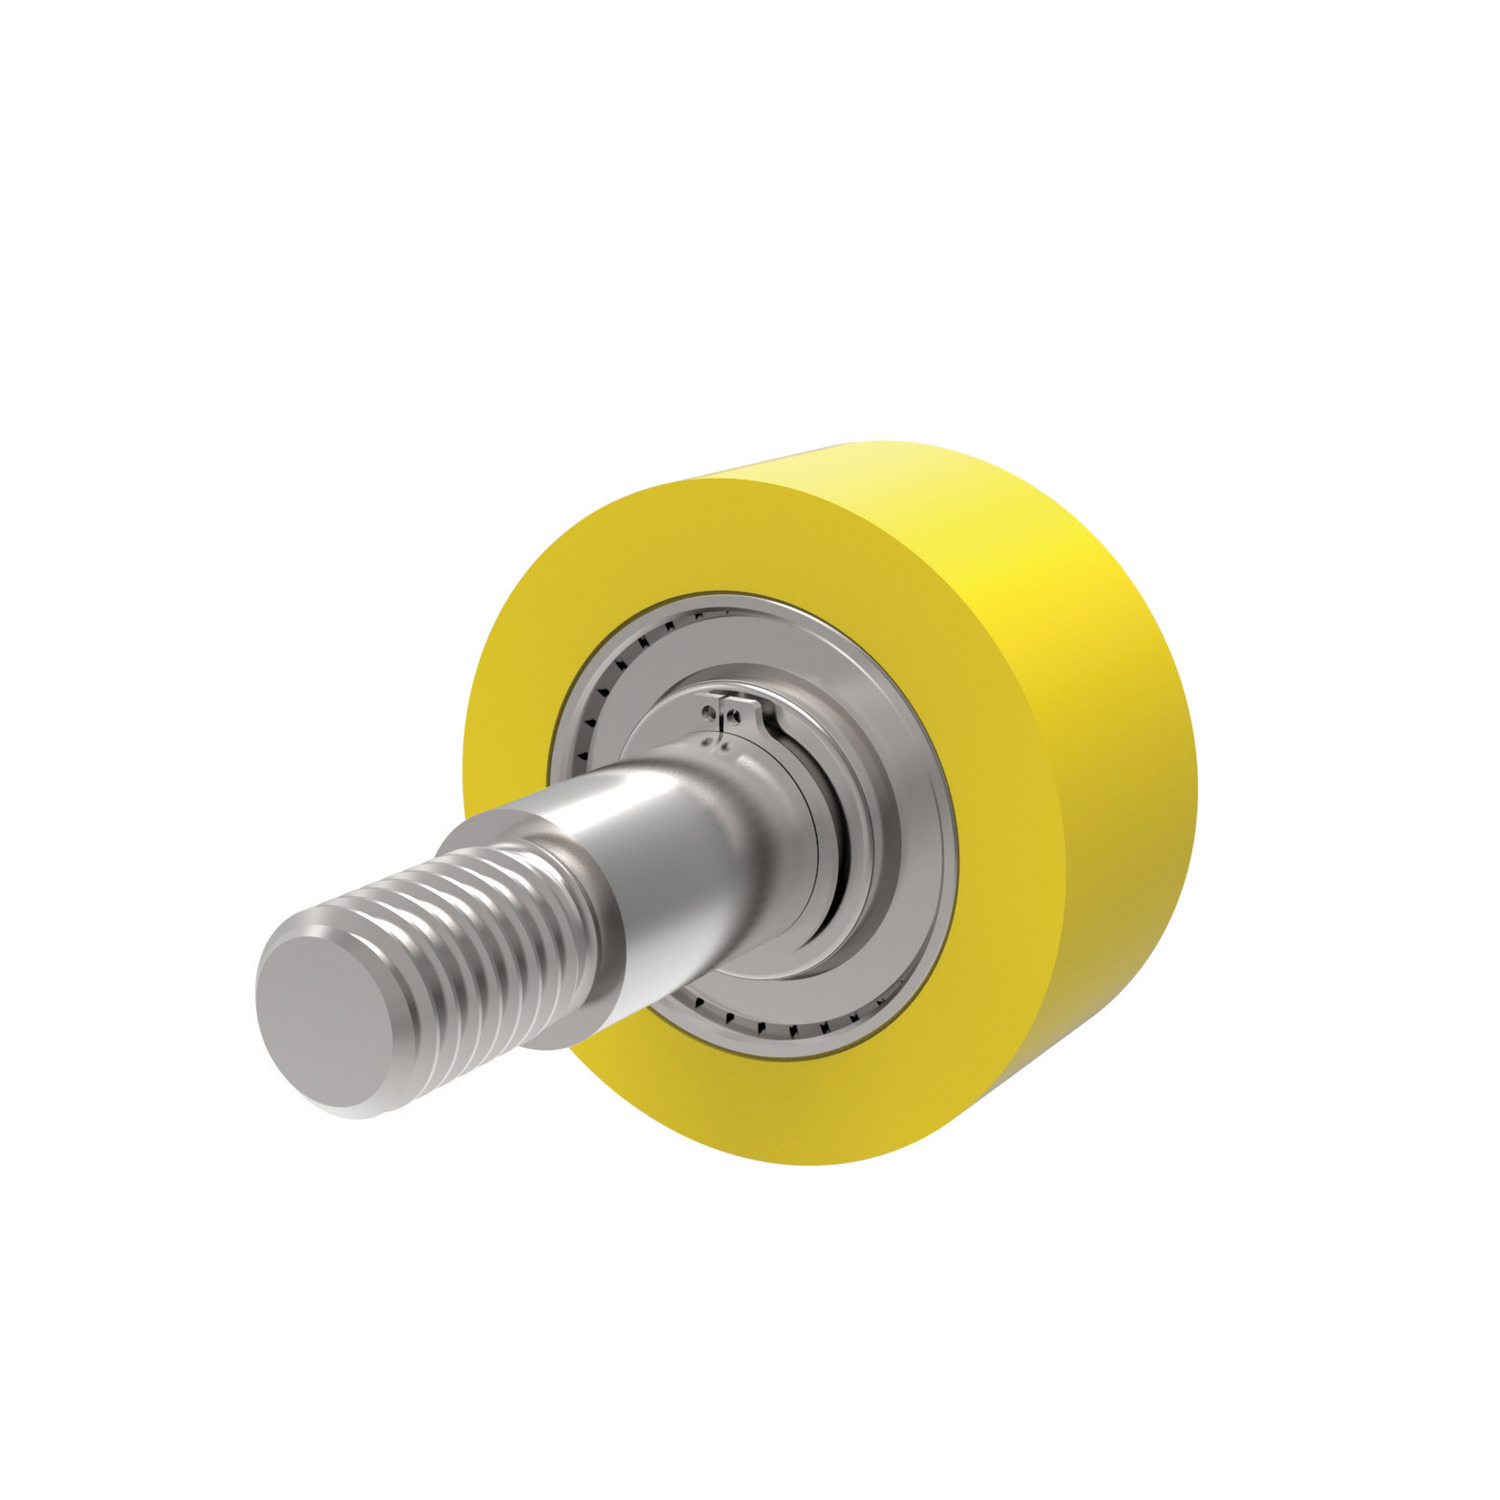 Solid Roller Solid rollers with clutch bearings for brake left or brake right applications in controlling component movement.